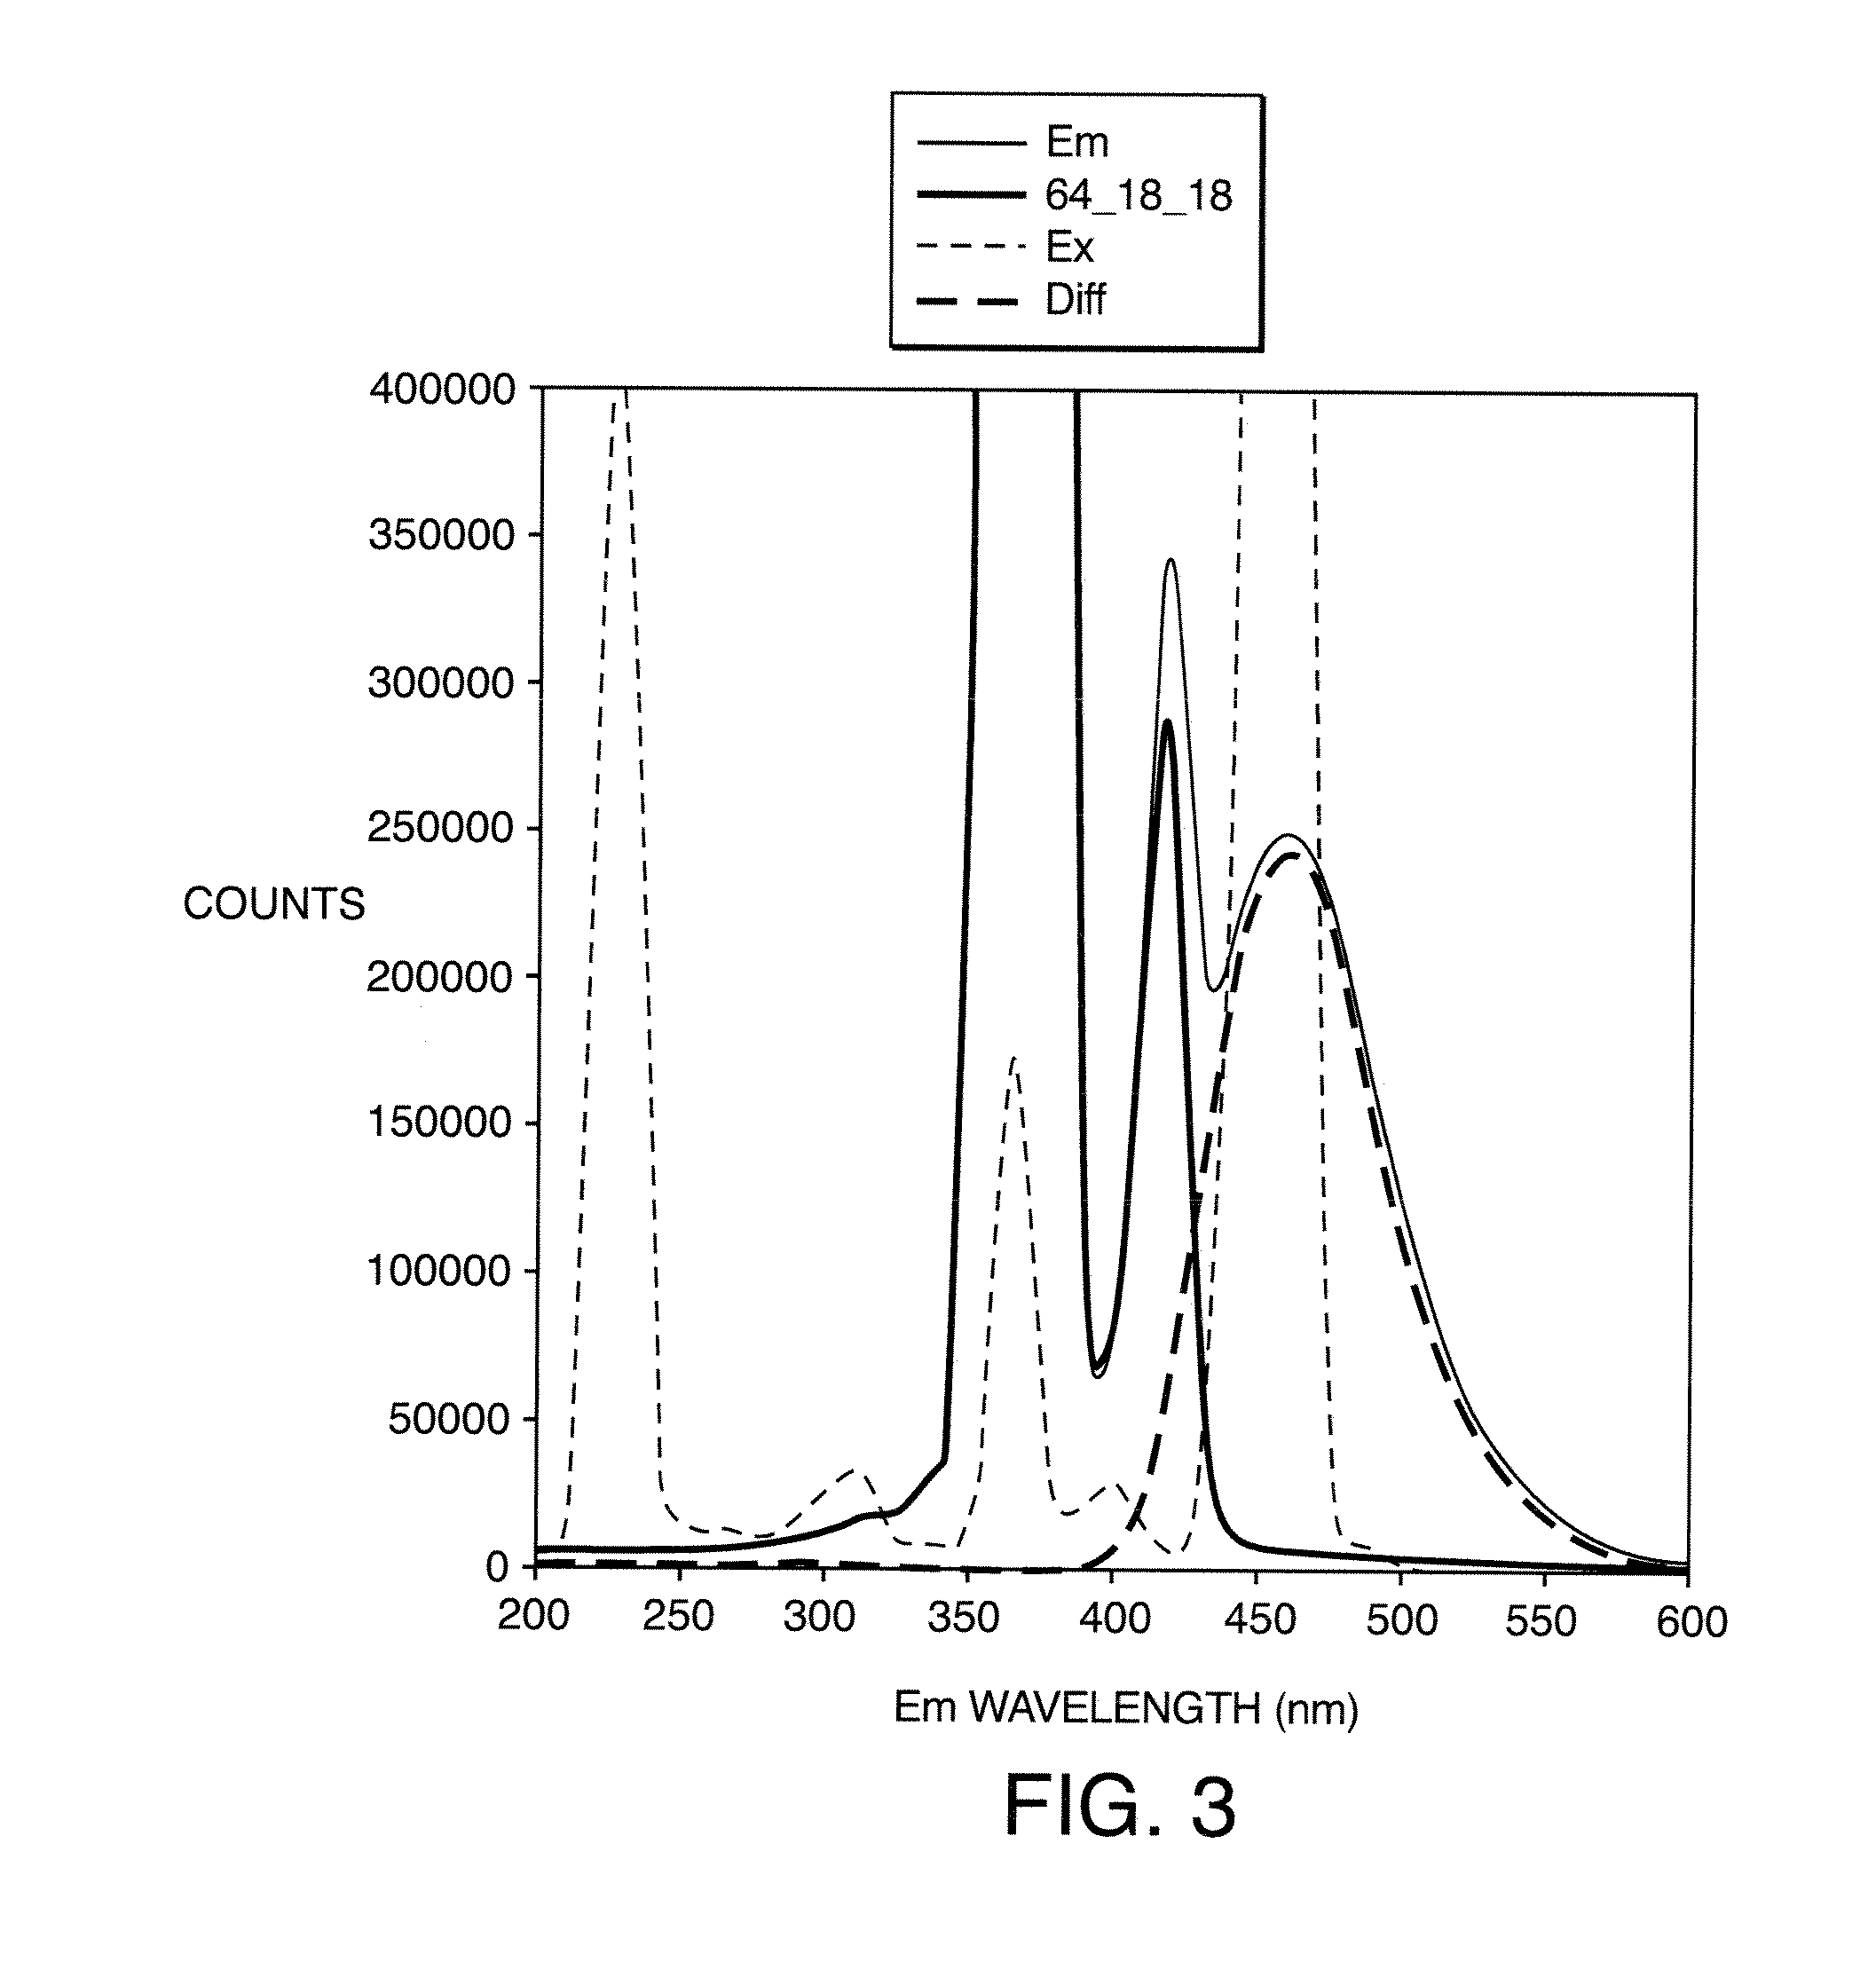 Apparatus And Methods For Performing Photoreactions And Analytical Methods And Devices To Detect Photo-Reacting Compounds